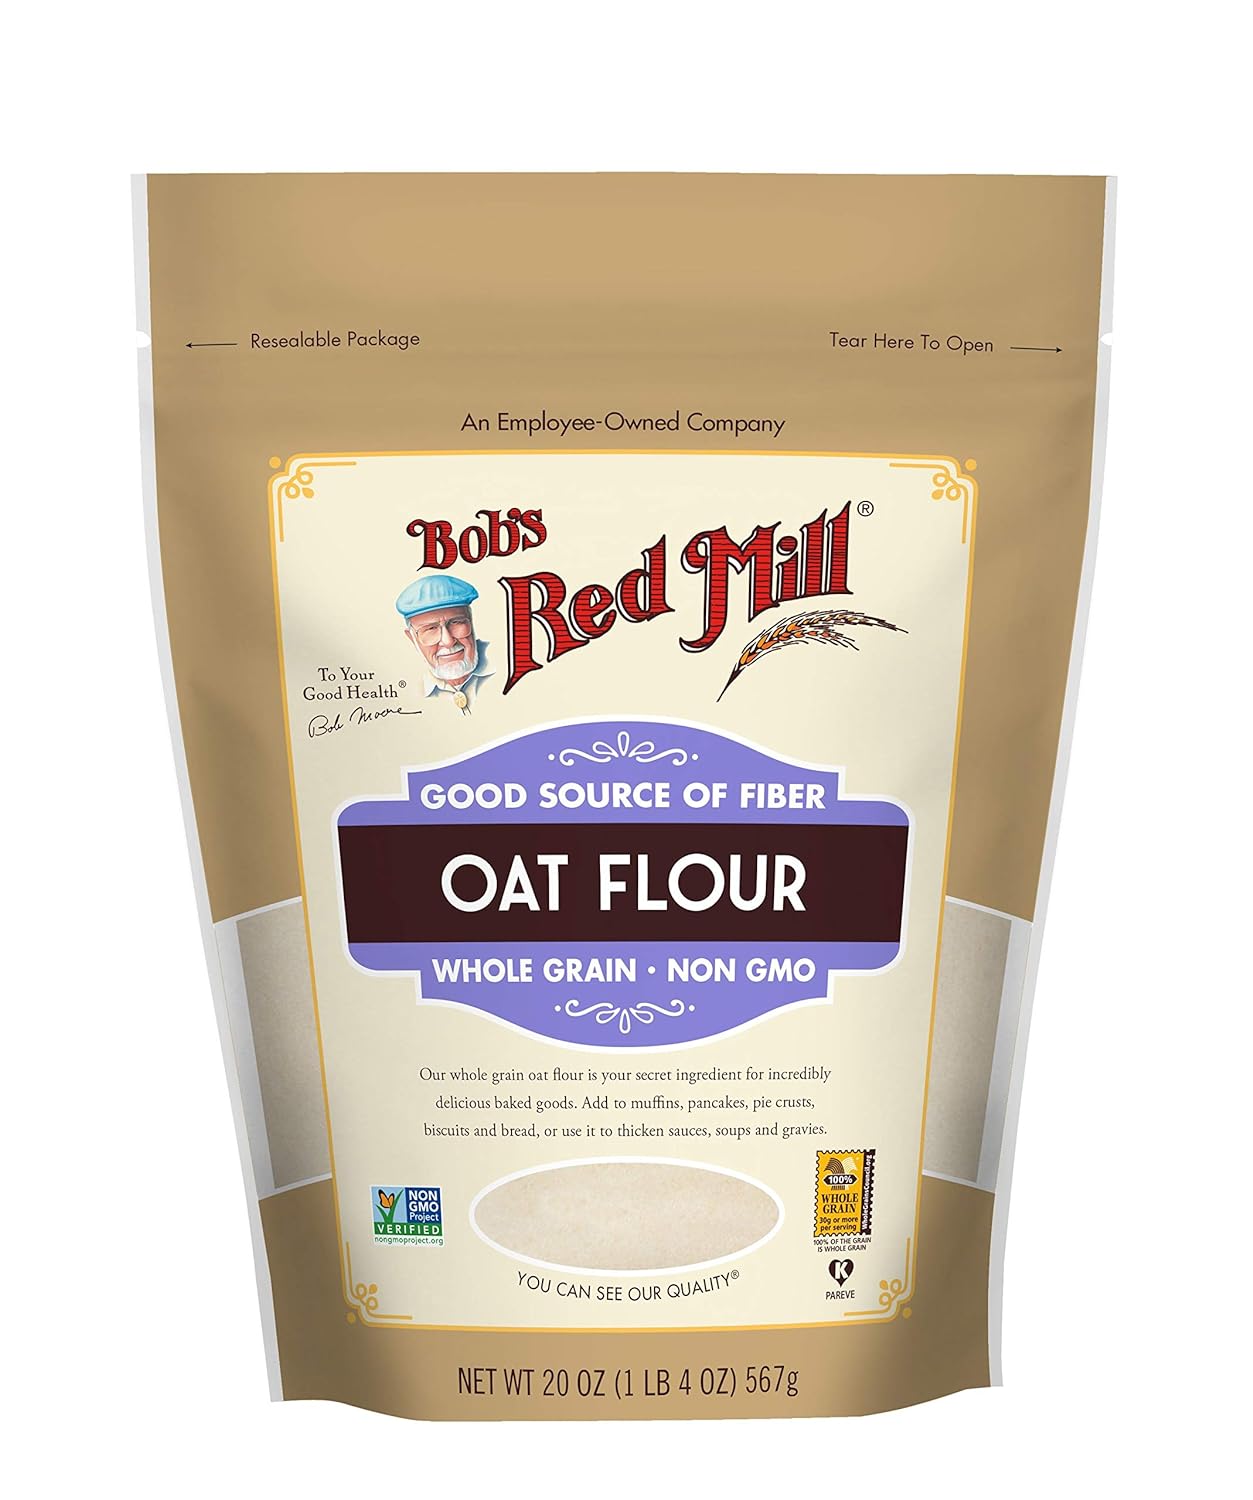 Bob's Red Mill Whole Grain Oat Flour: A Nutritious and Versatile Baking Ingredient